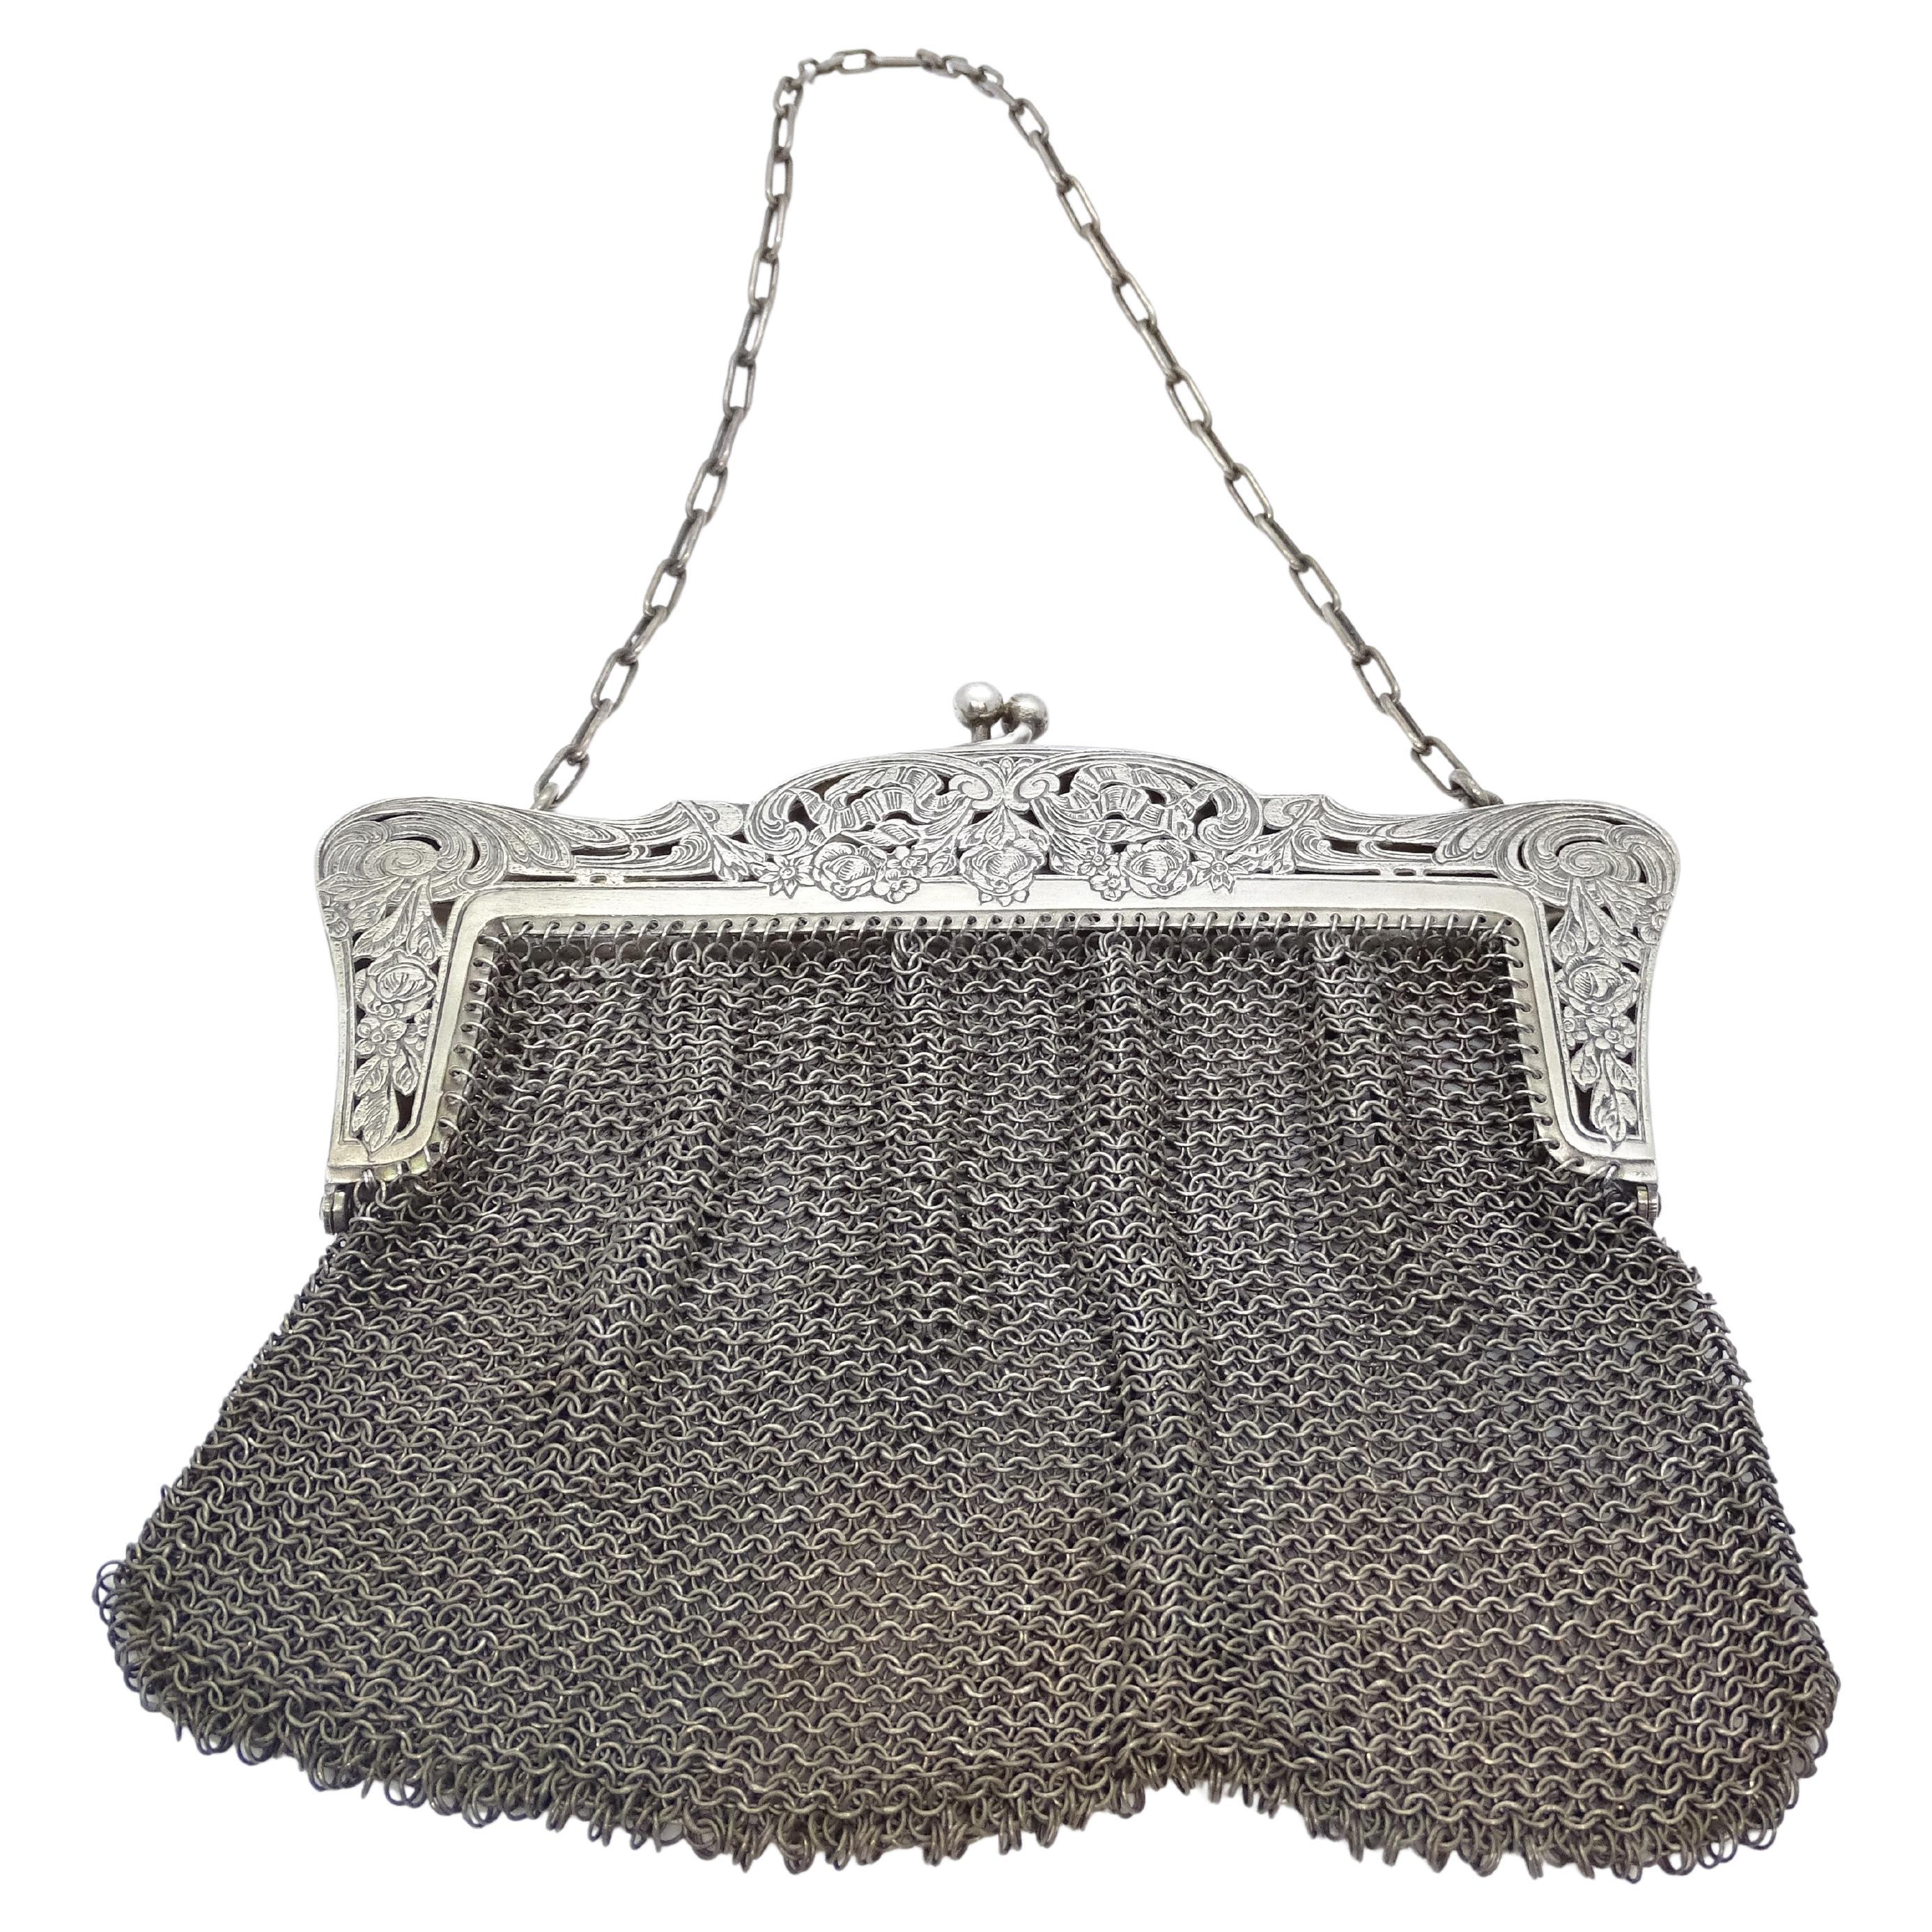 Antique pouch bag, silver plate, late 19th century – England